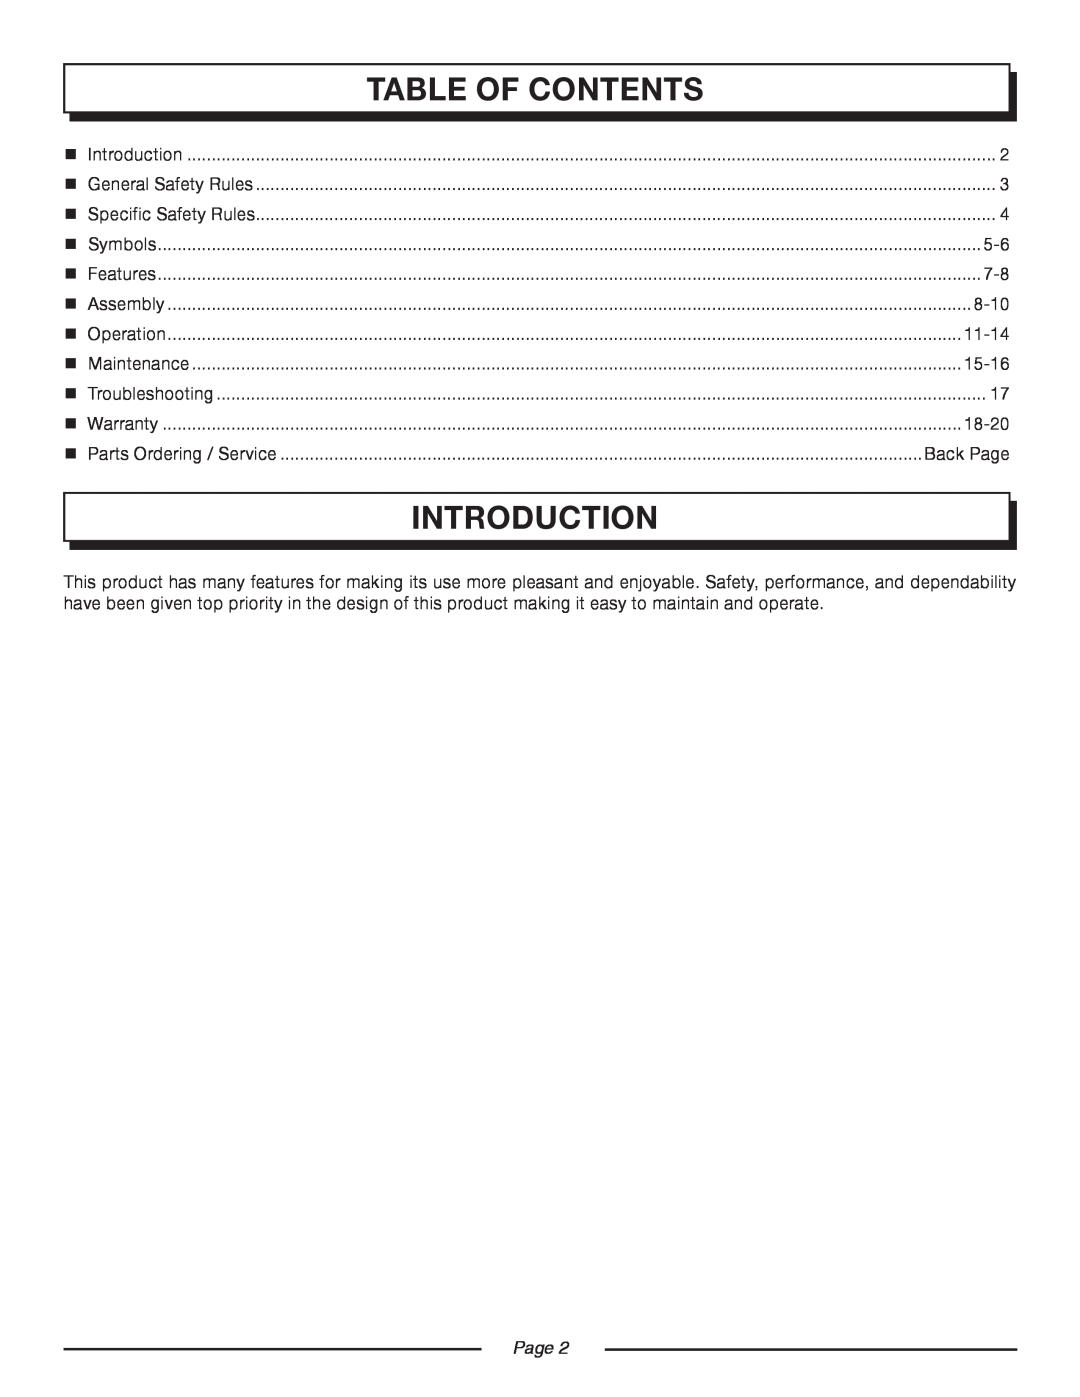 Homelite UT08951, UT08550 manual table of contents, introduction, 8-10, 11-14, 15-16, 18-20, Back Page, Page  